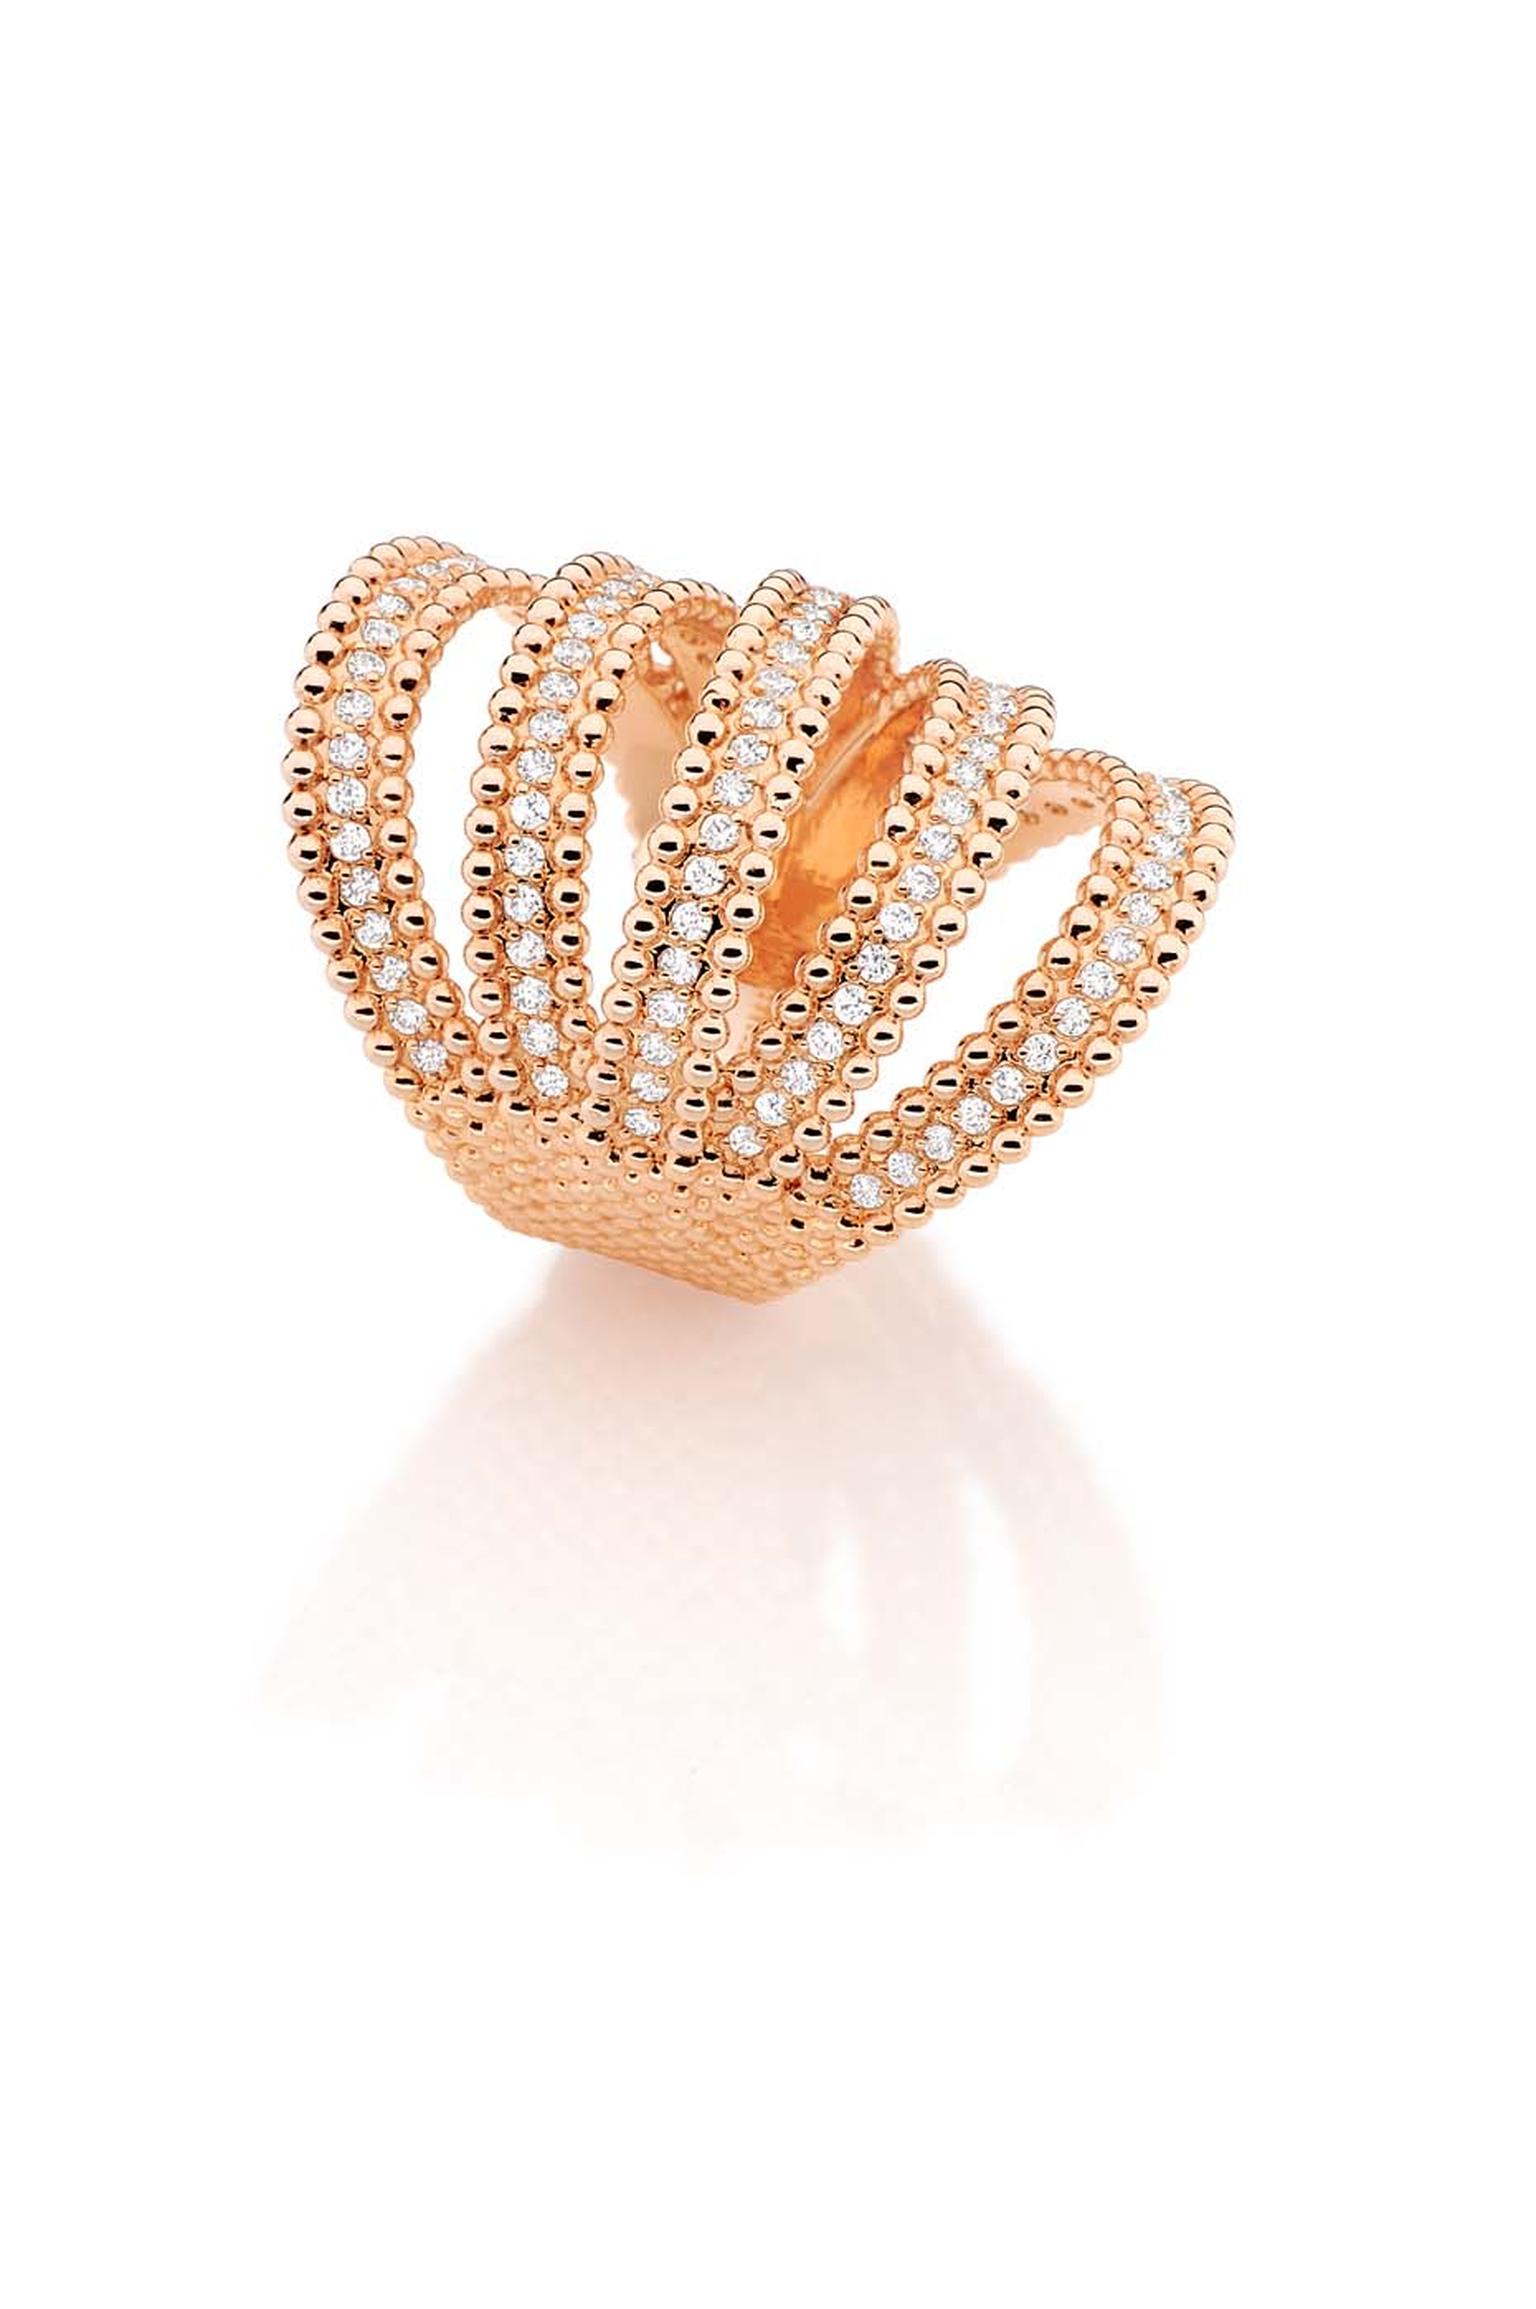 Carla Amorim Russia Collection rose gold Fountain ring, inspired by the architecture of the Peterhof.